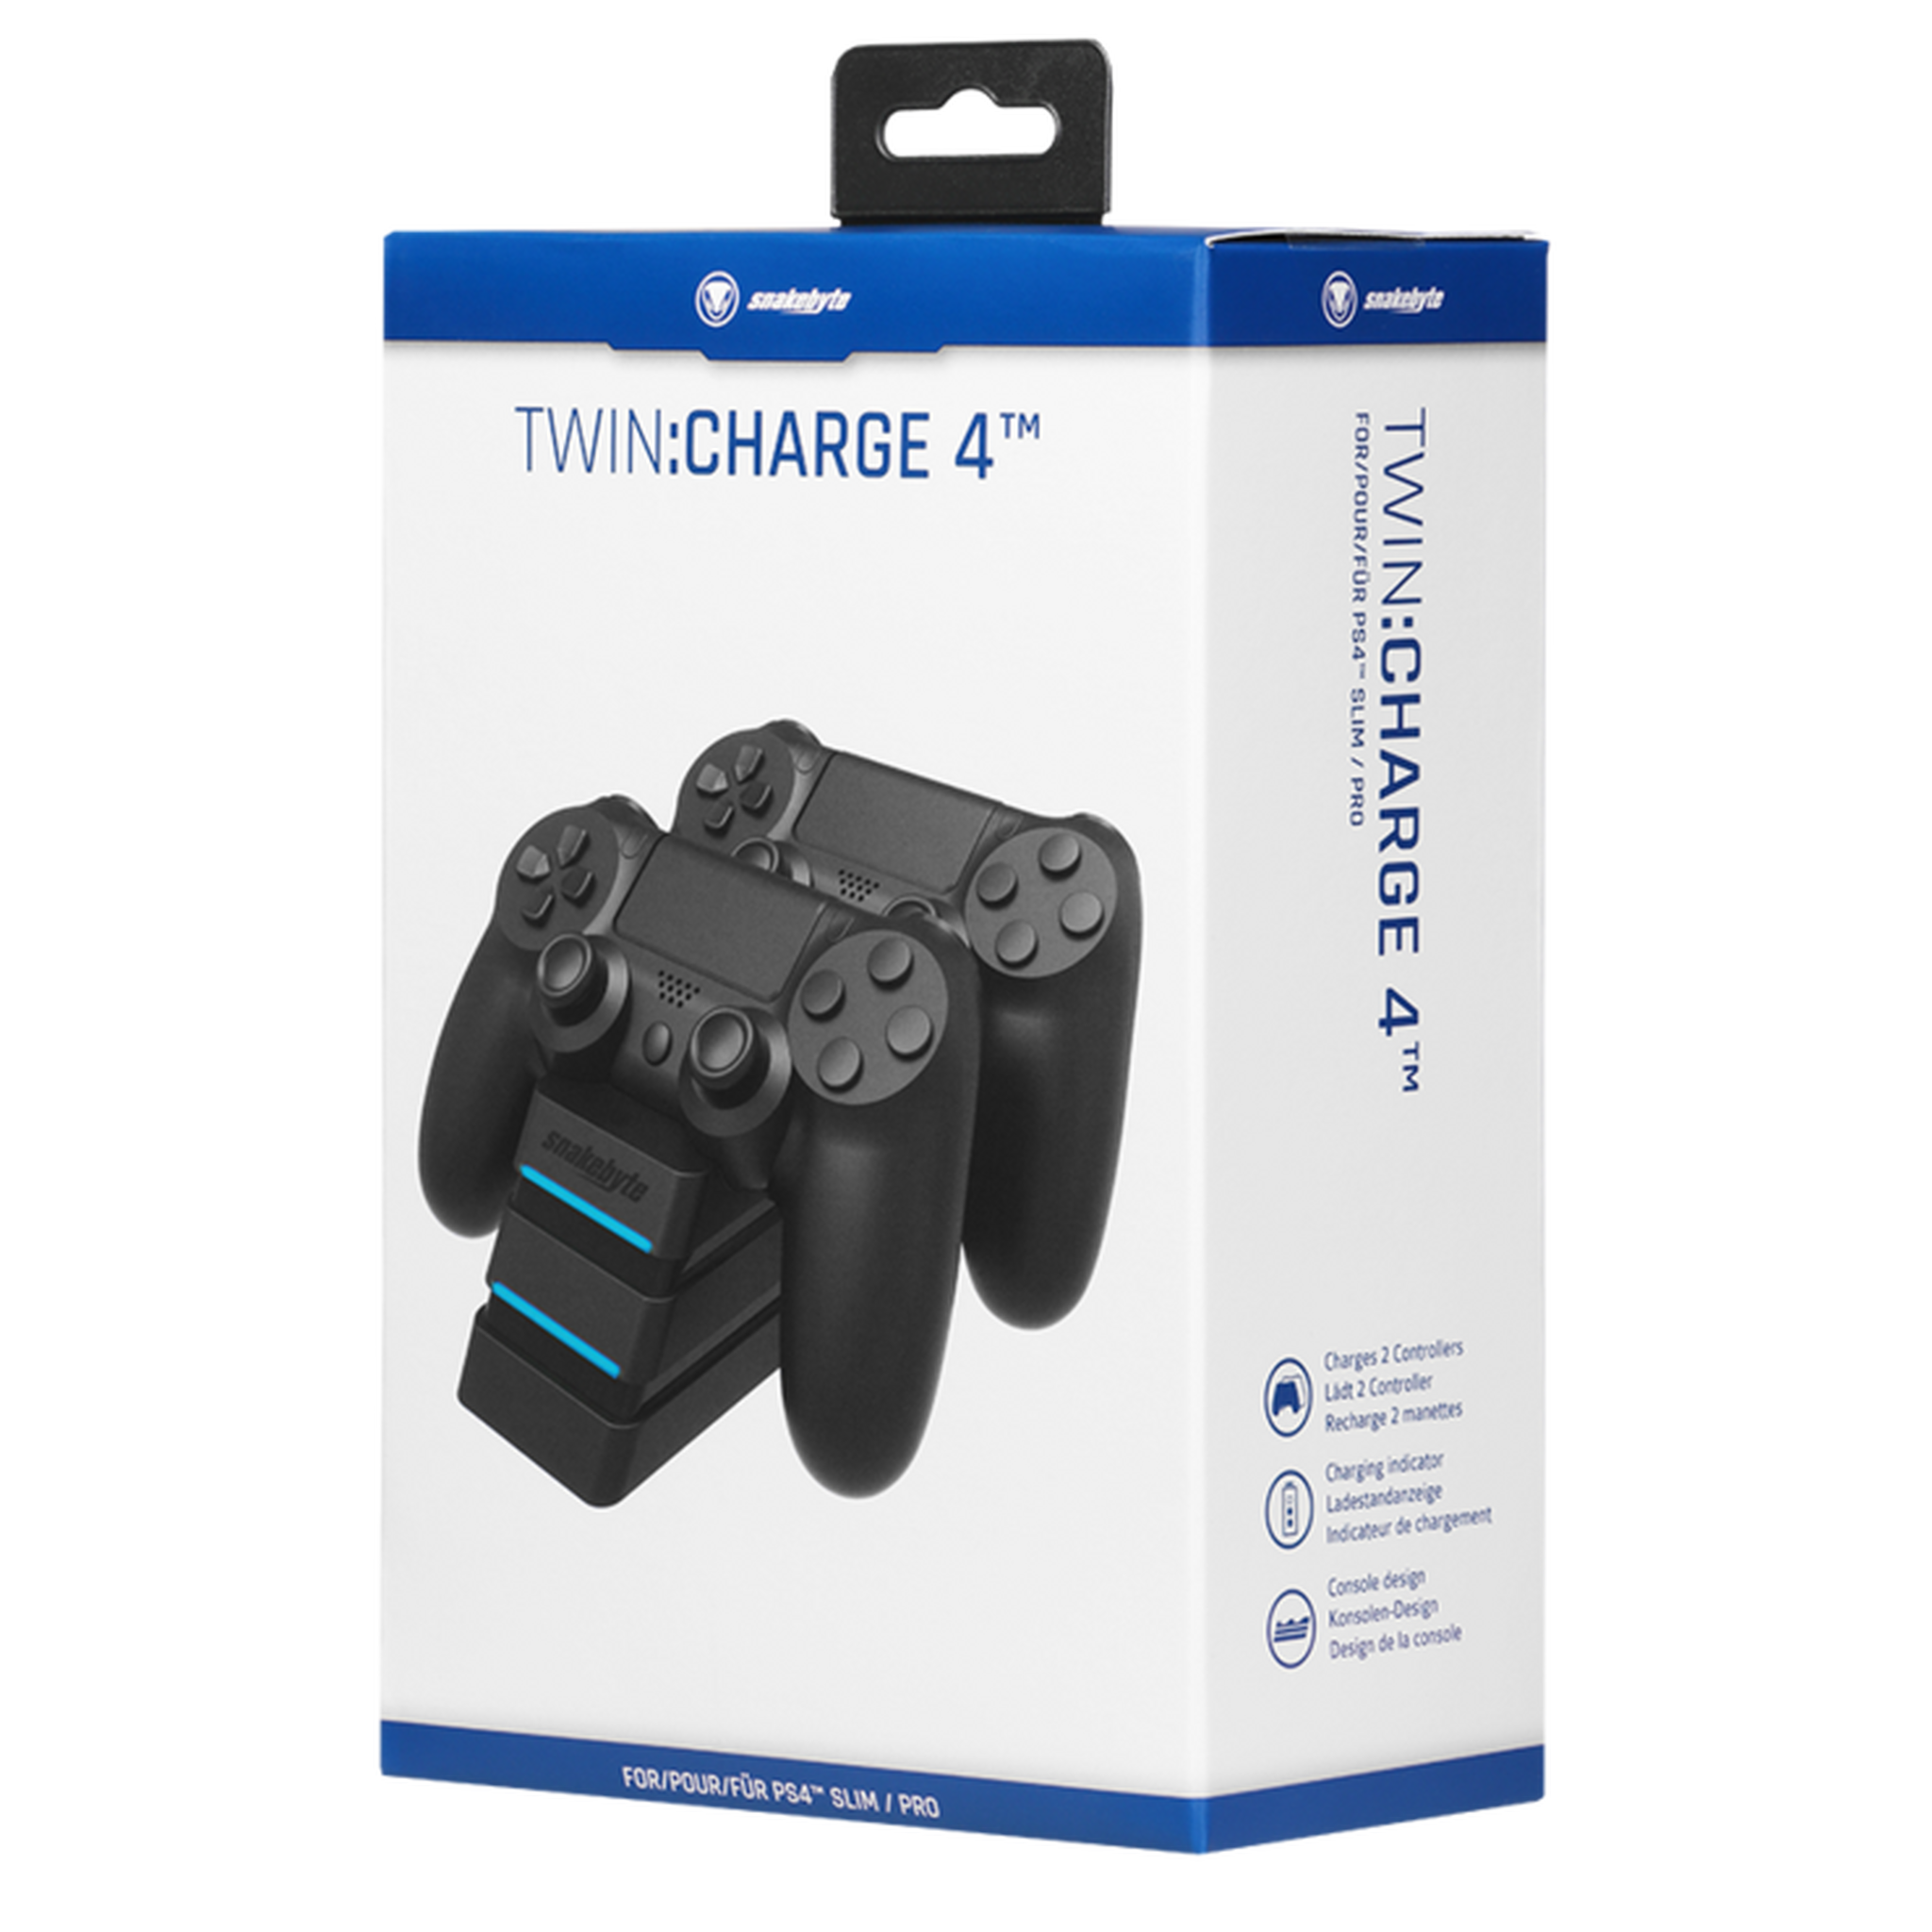 Snakebyte Twin Charge 4 Docking Station for Playstation 4 Dualshock Controller